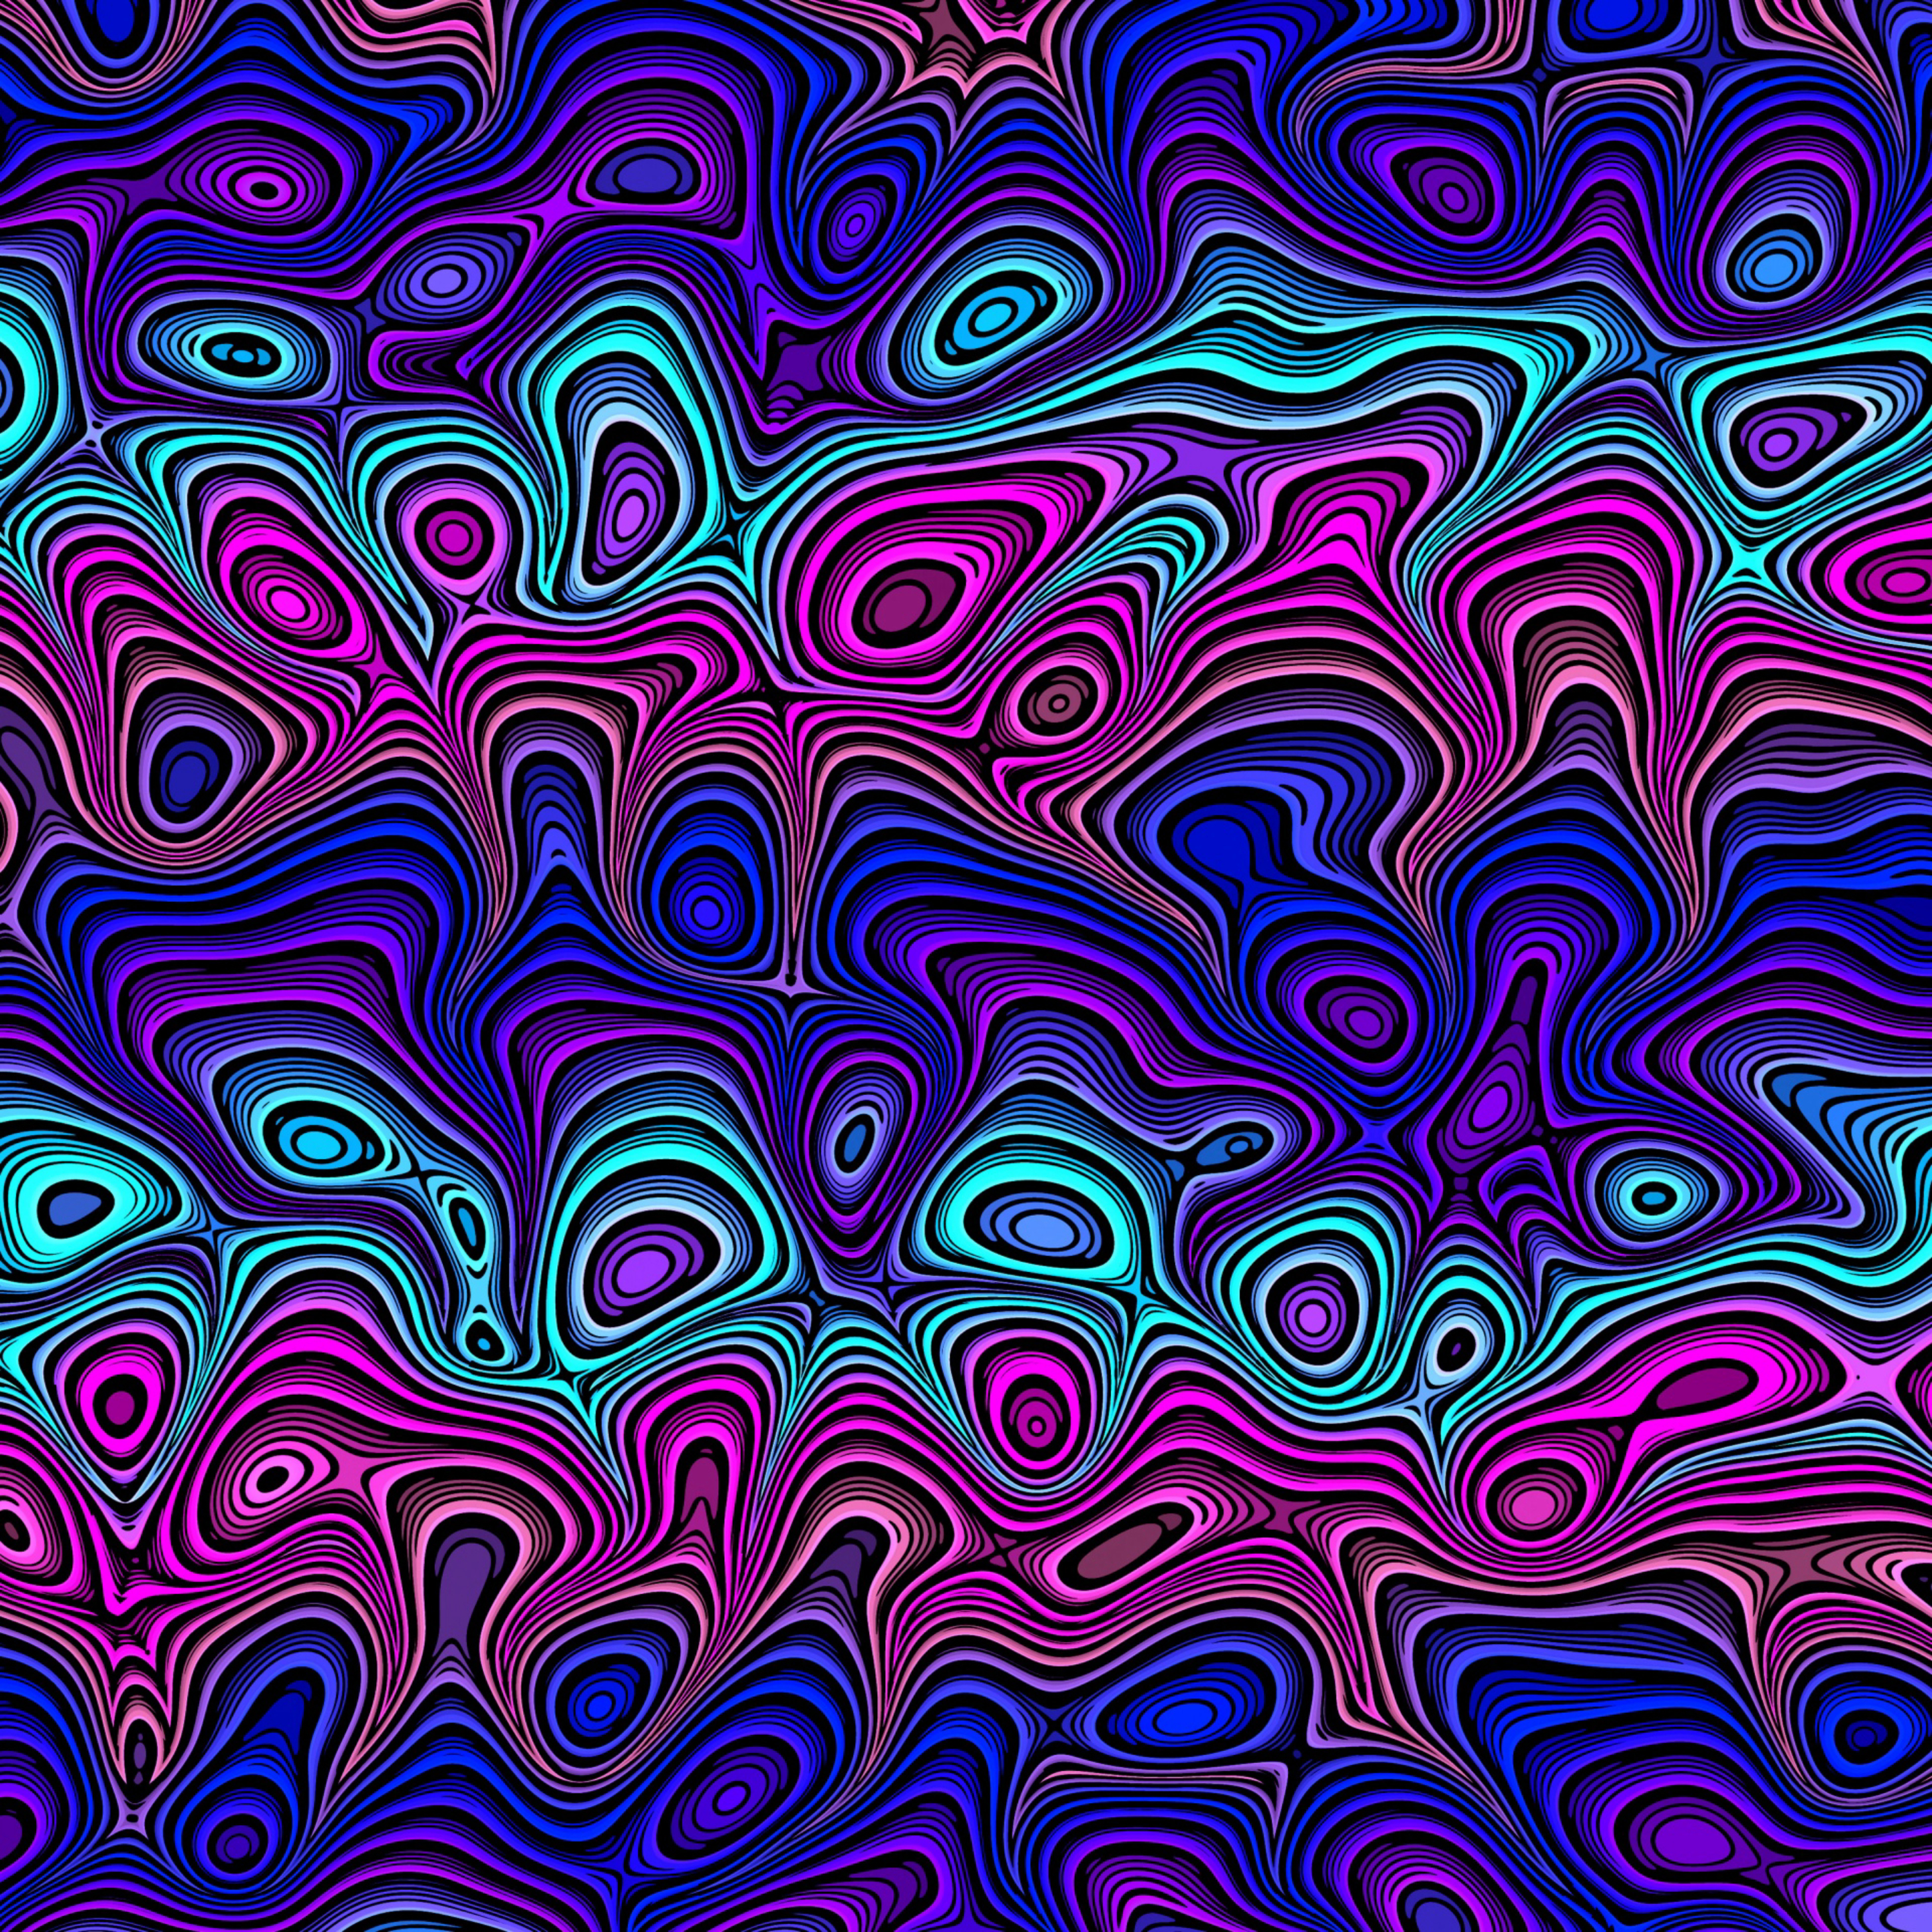 motley, abstract, multicolored, lines, wavy, swirling, involute wallpapers for tablet